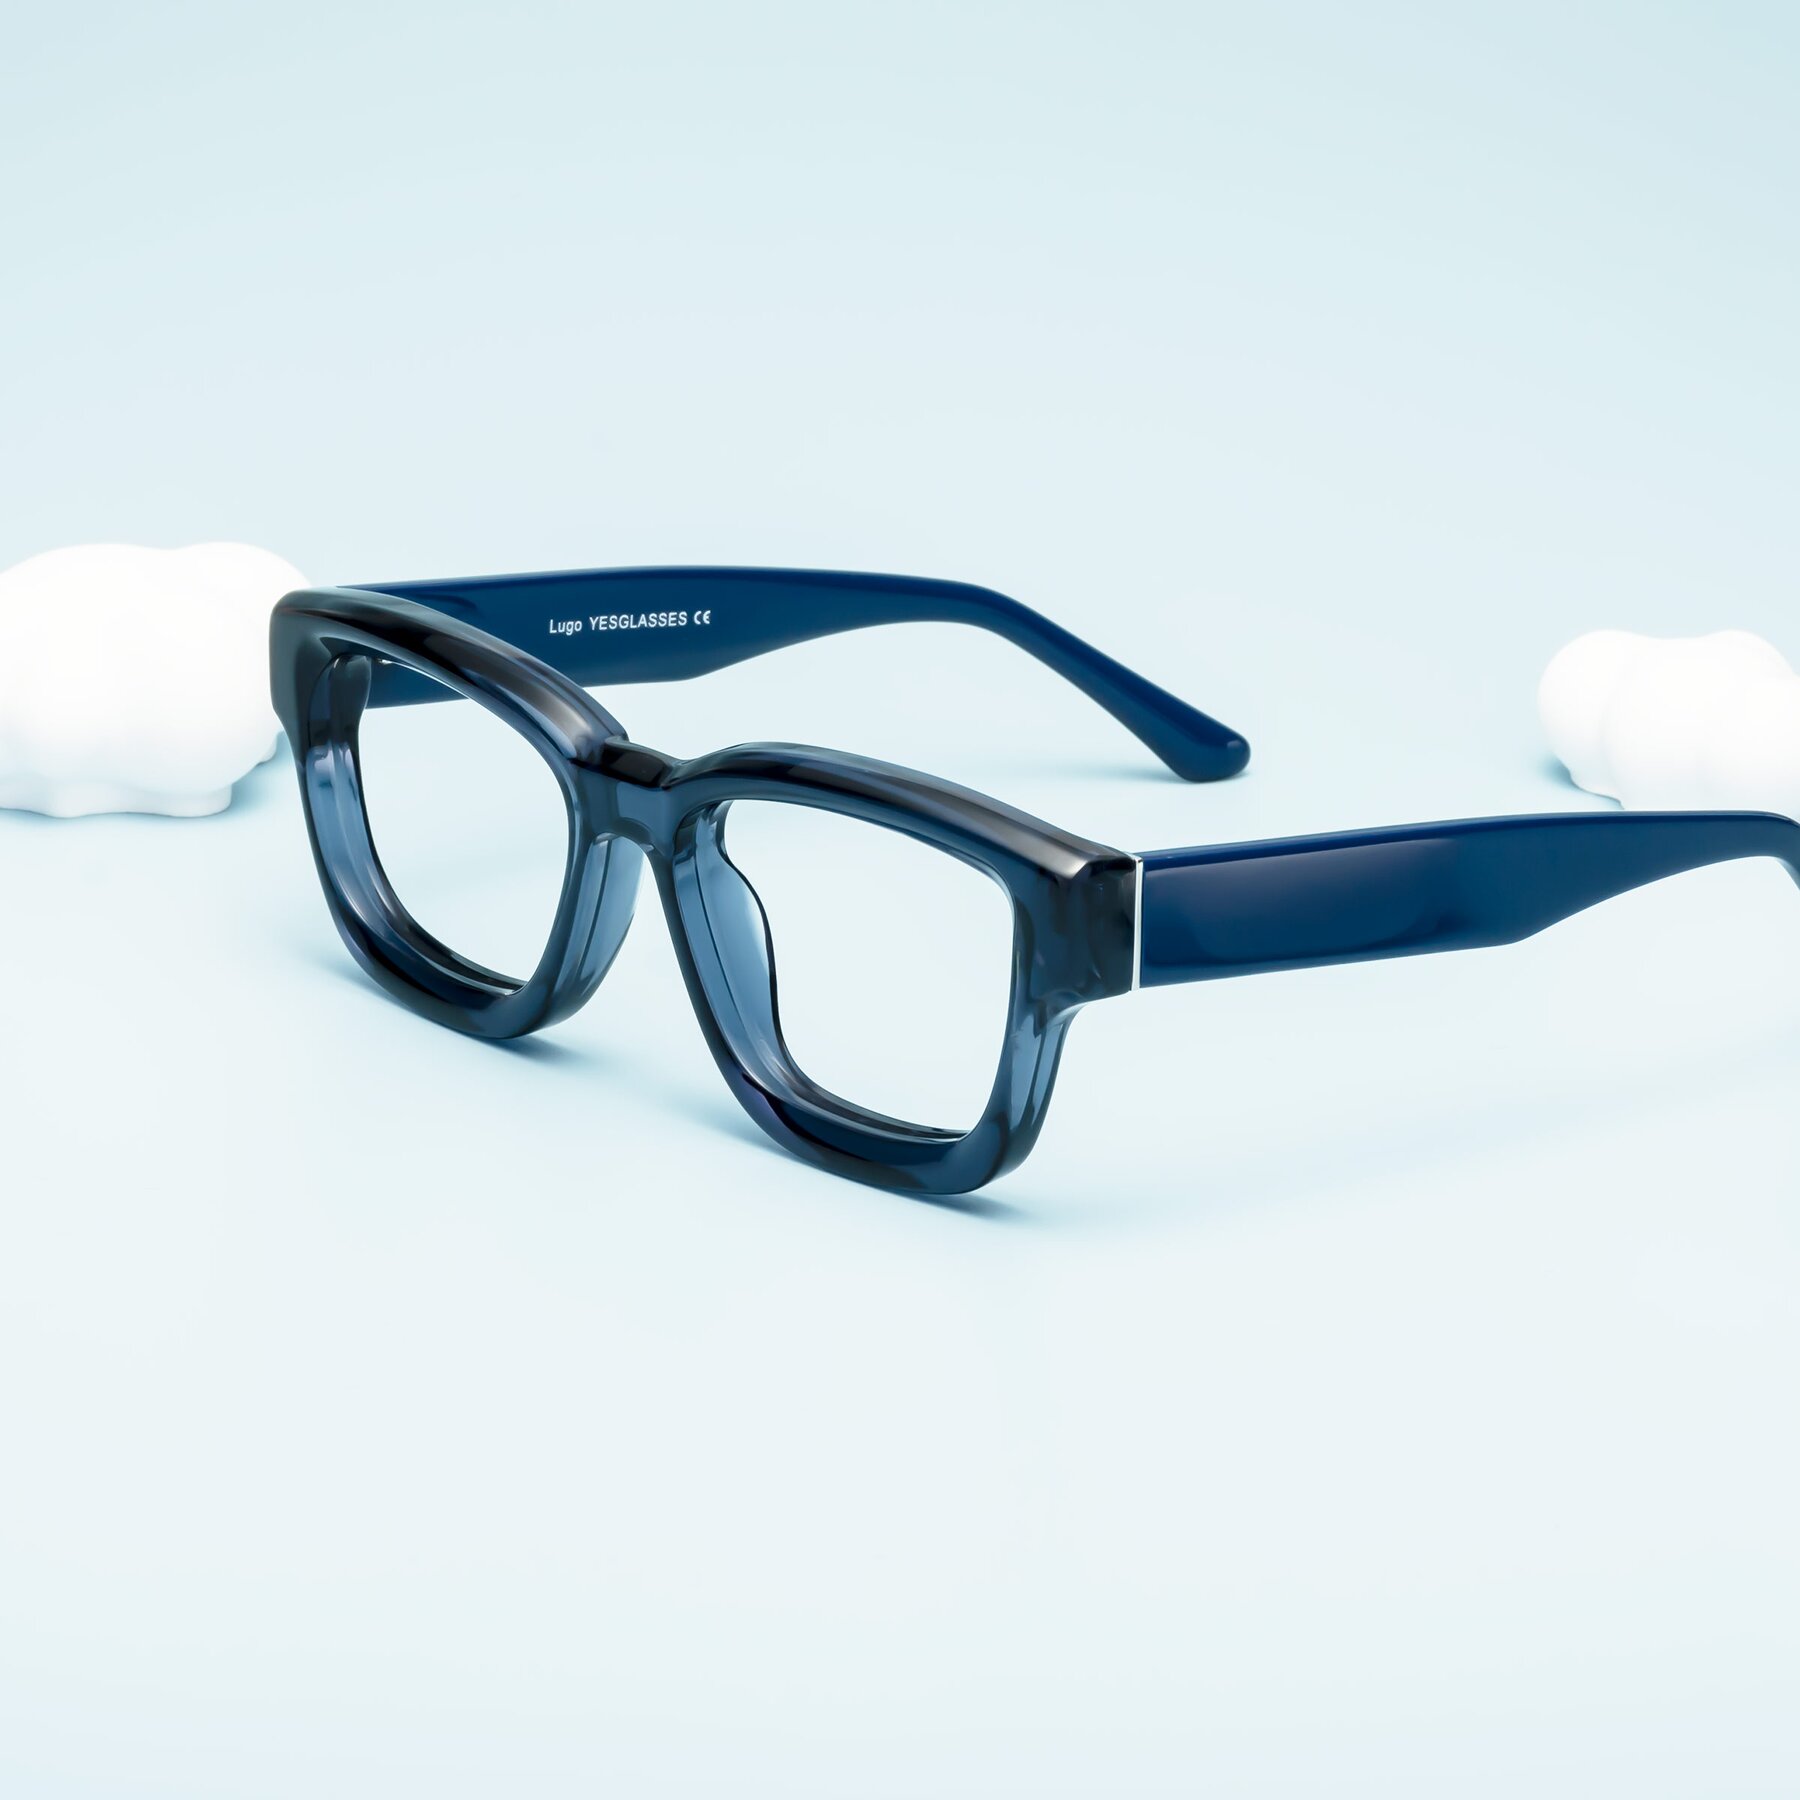 Lifestyle photography #1 of Lugo in Translucent Blue with Clear Eyeglass Lenses